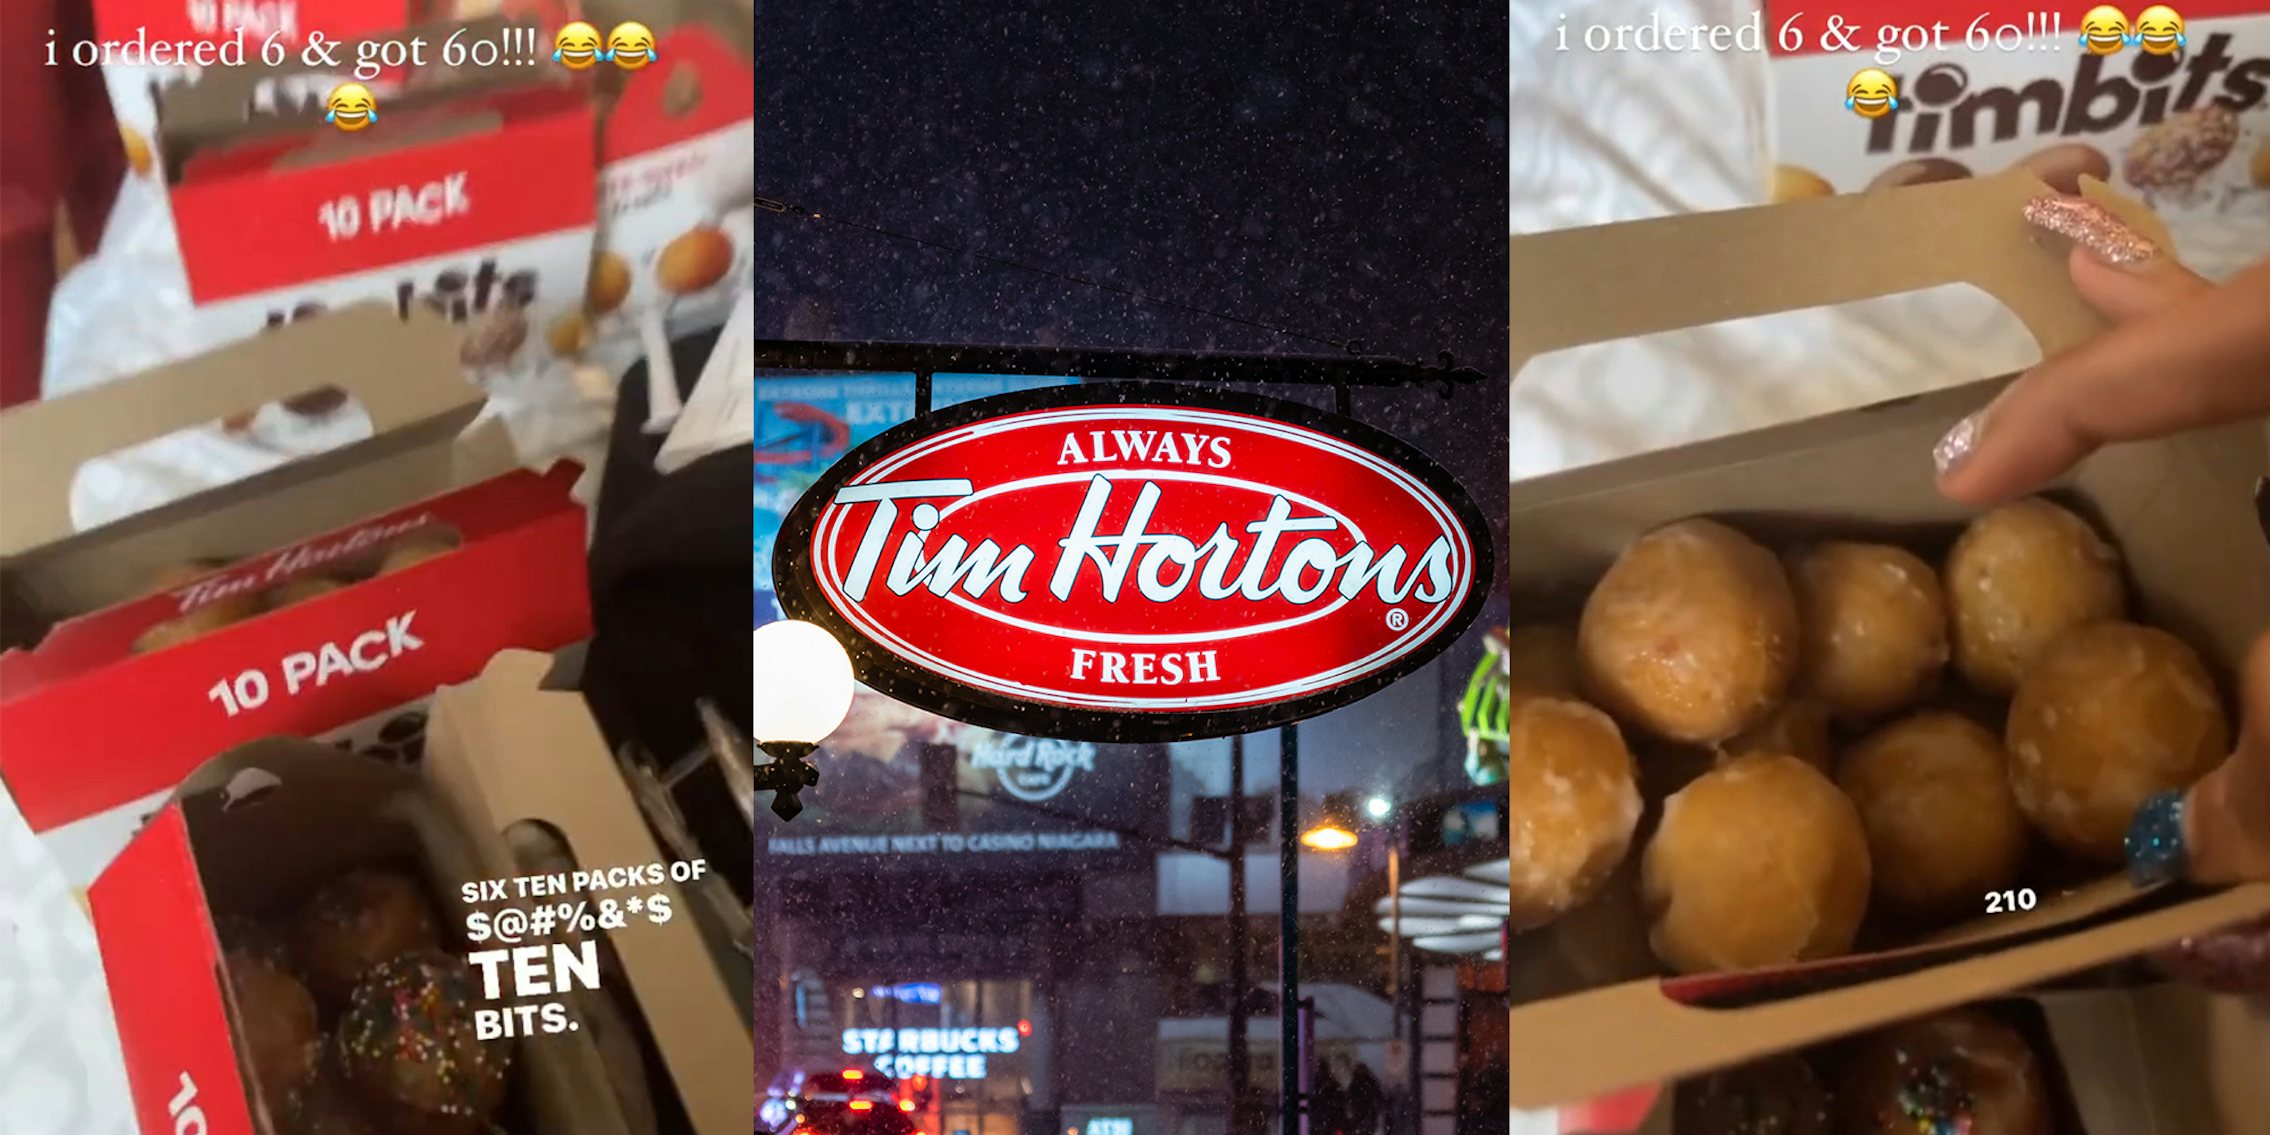 Tim Hortons customer orders 6 TimBits. She receives 60